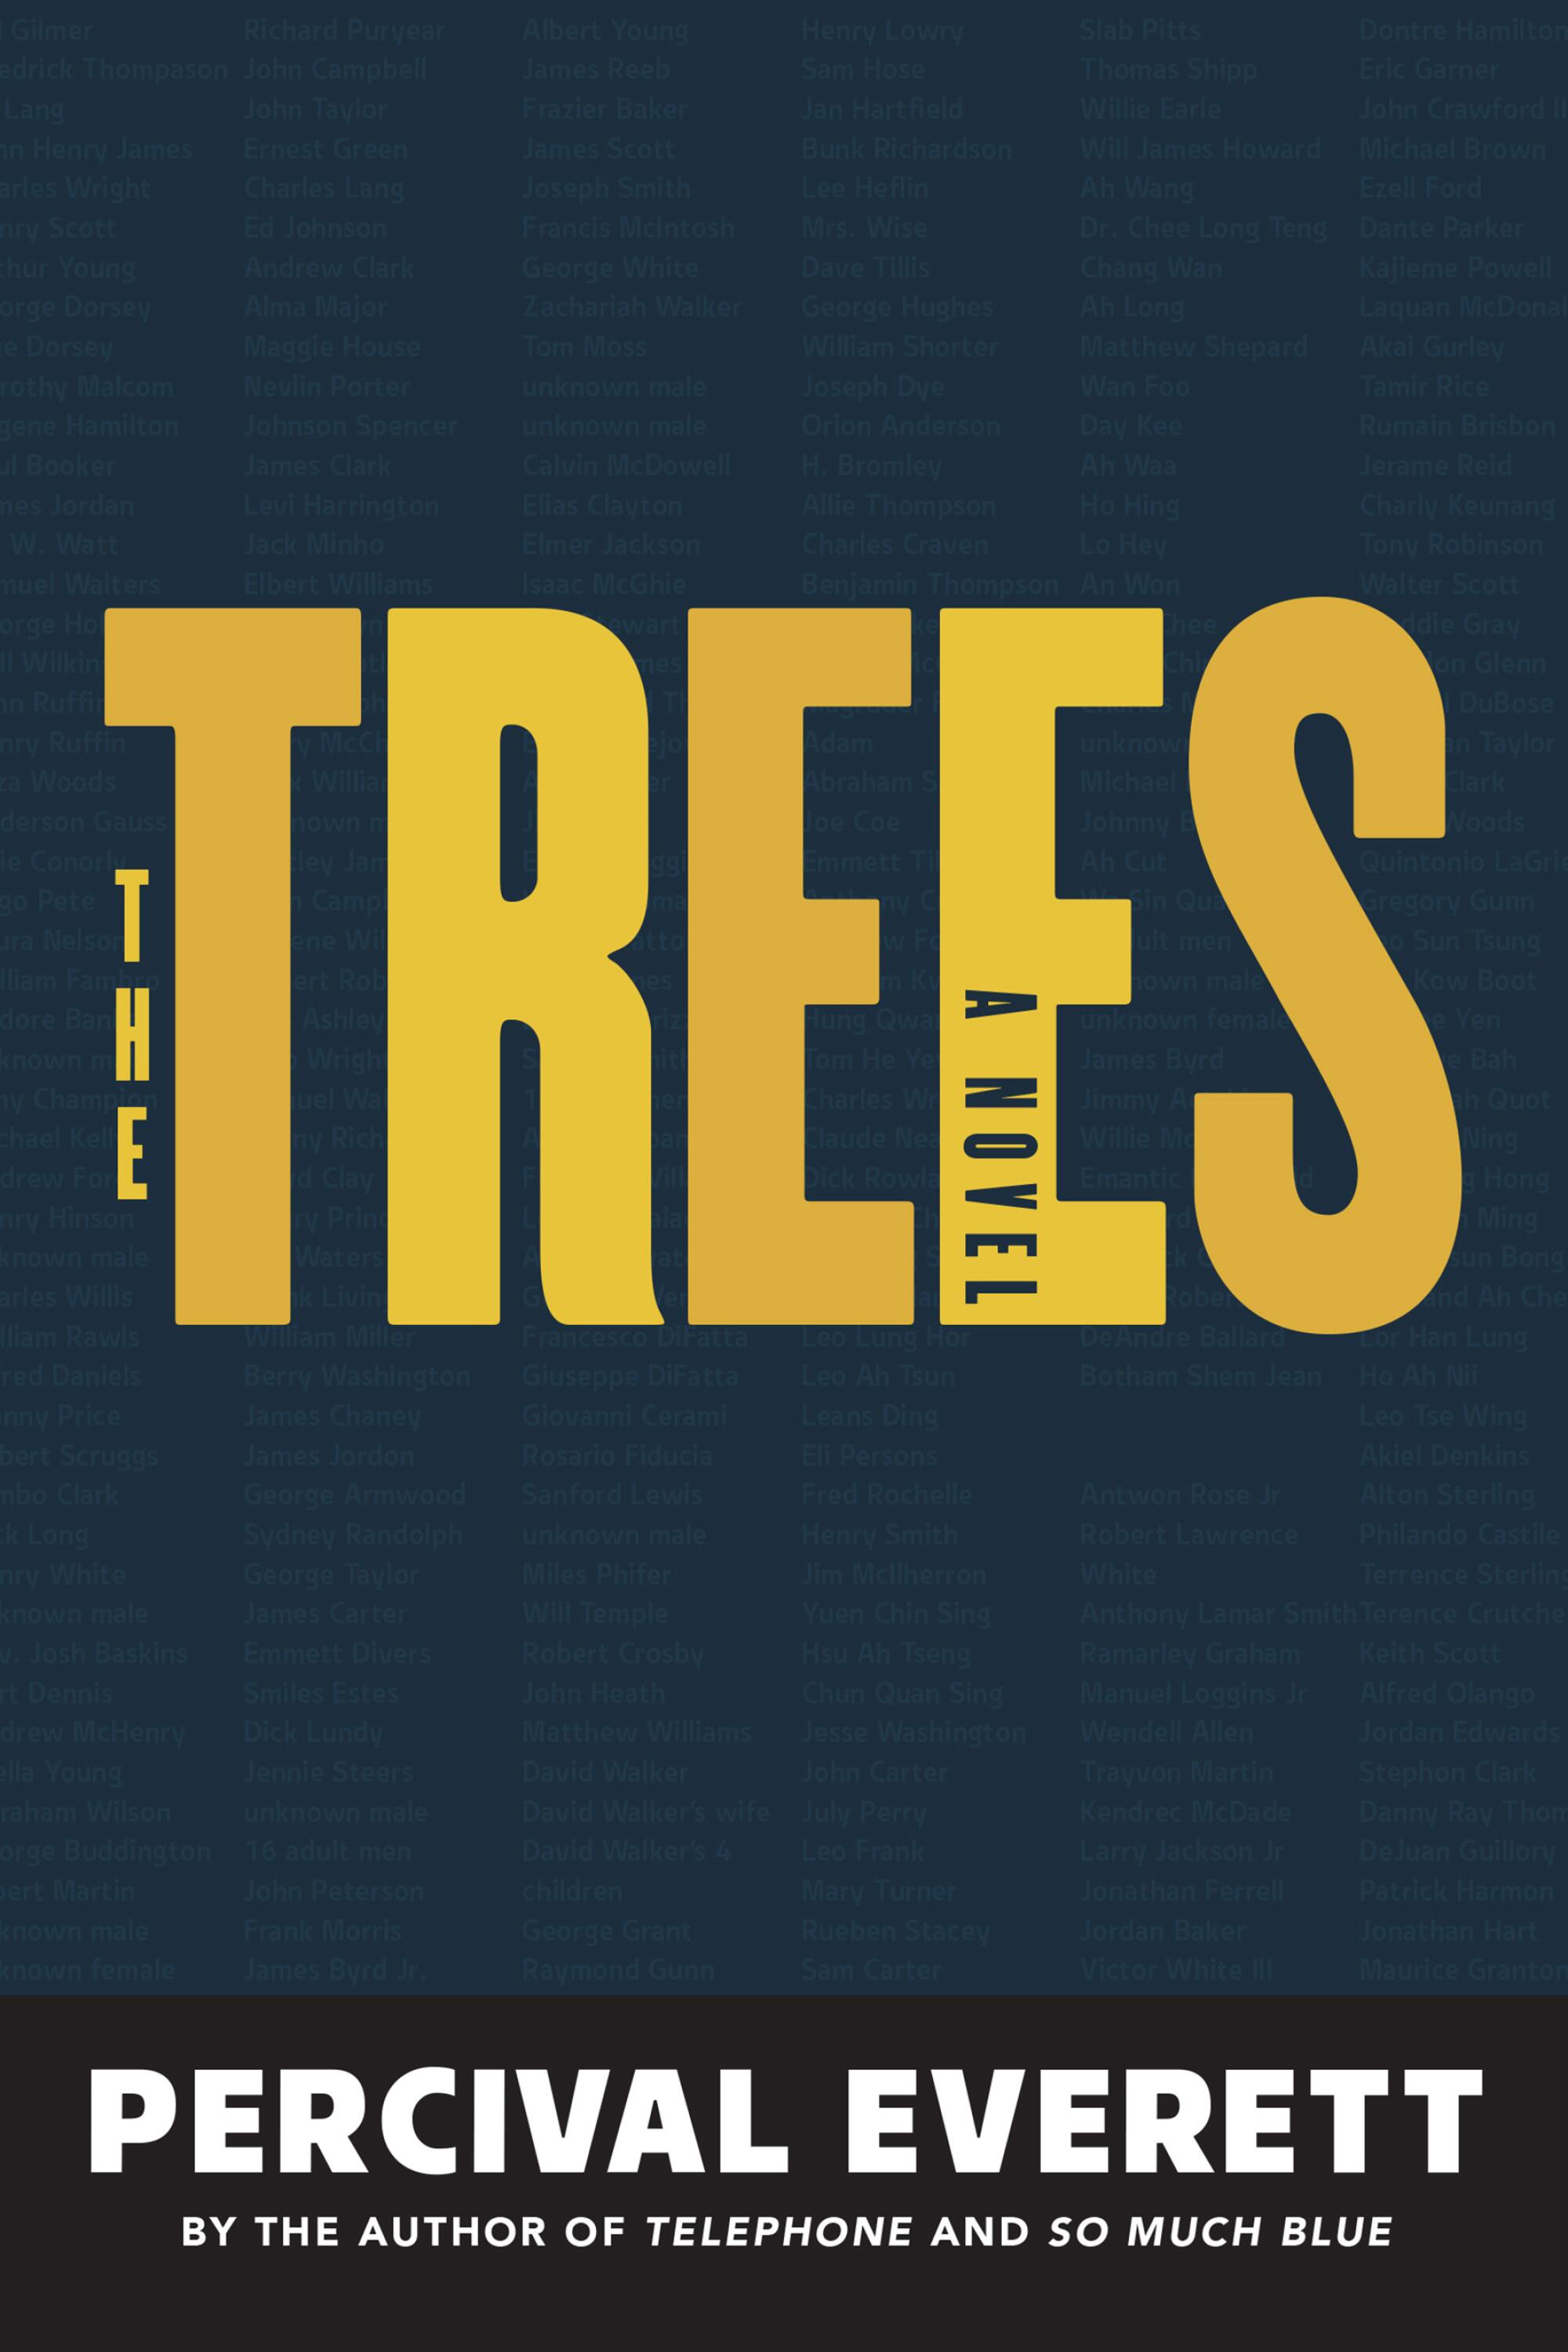 The cover of "The Trees," by Percival Everett